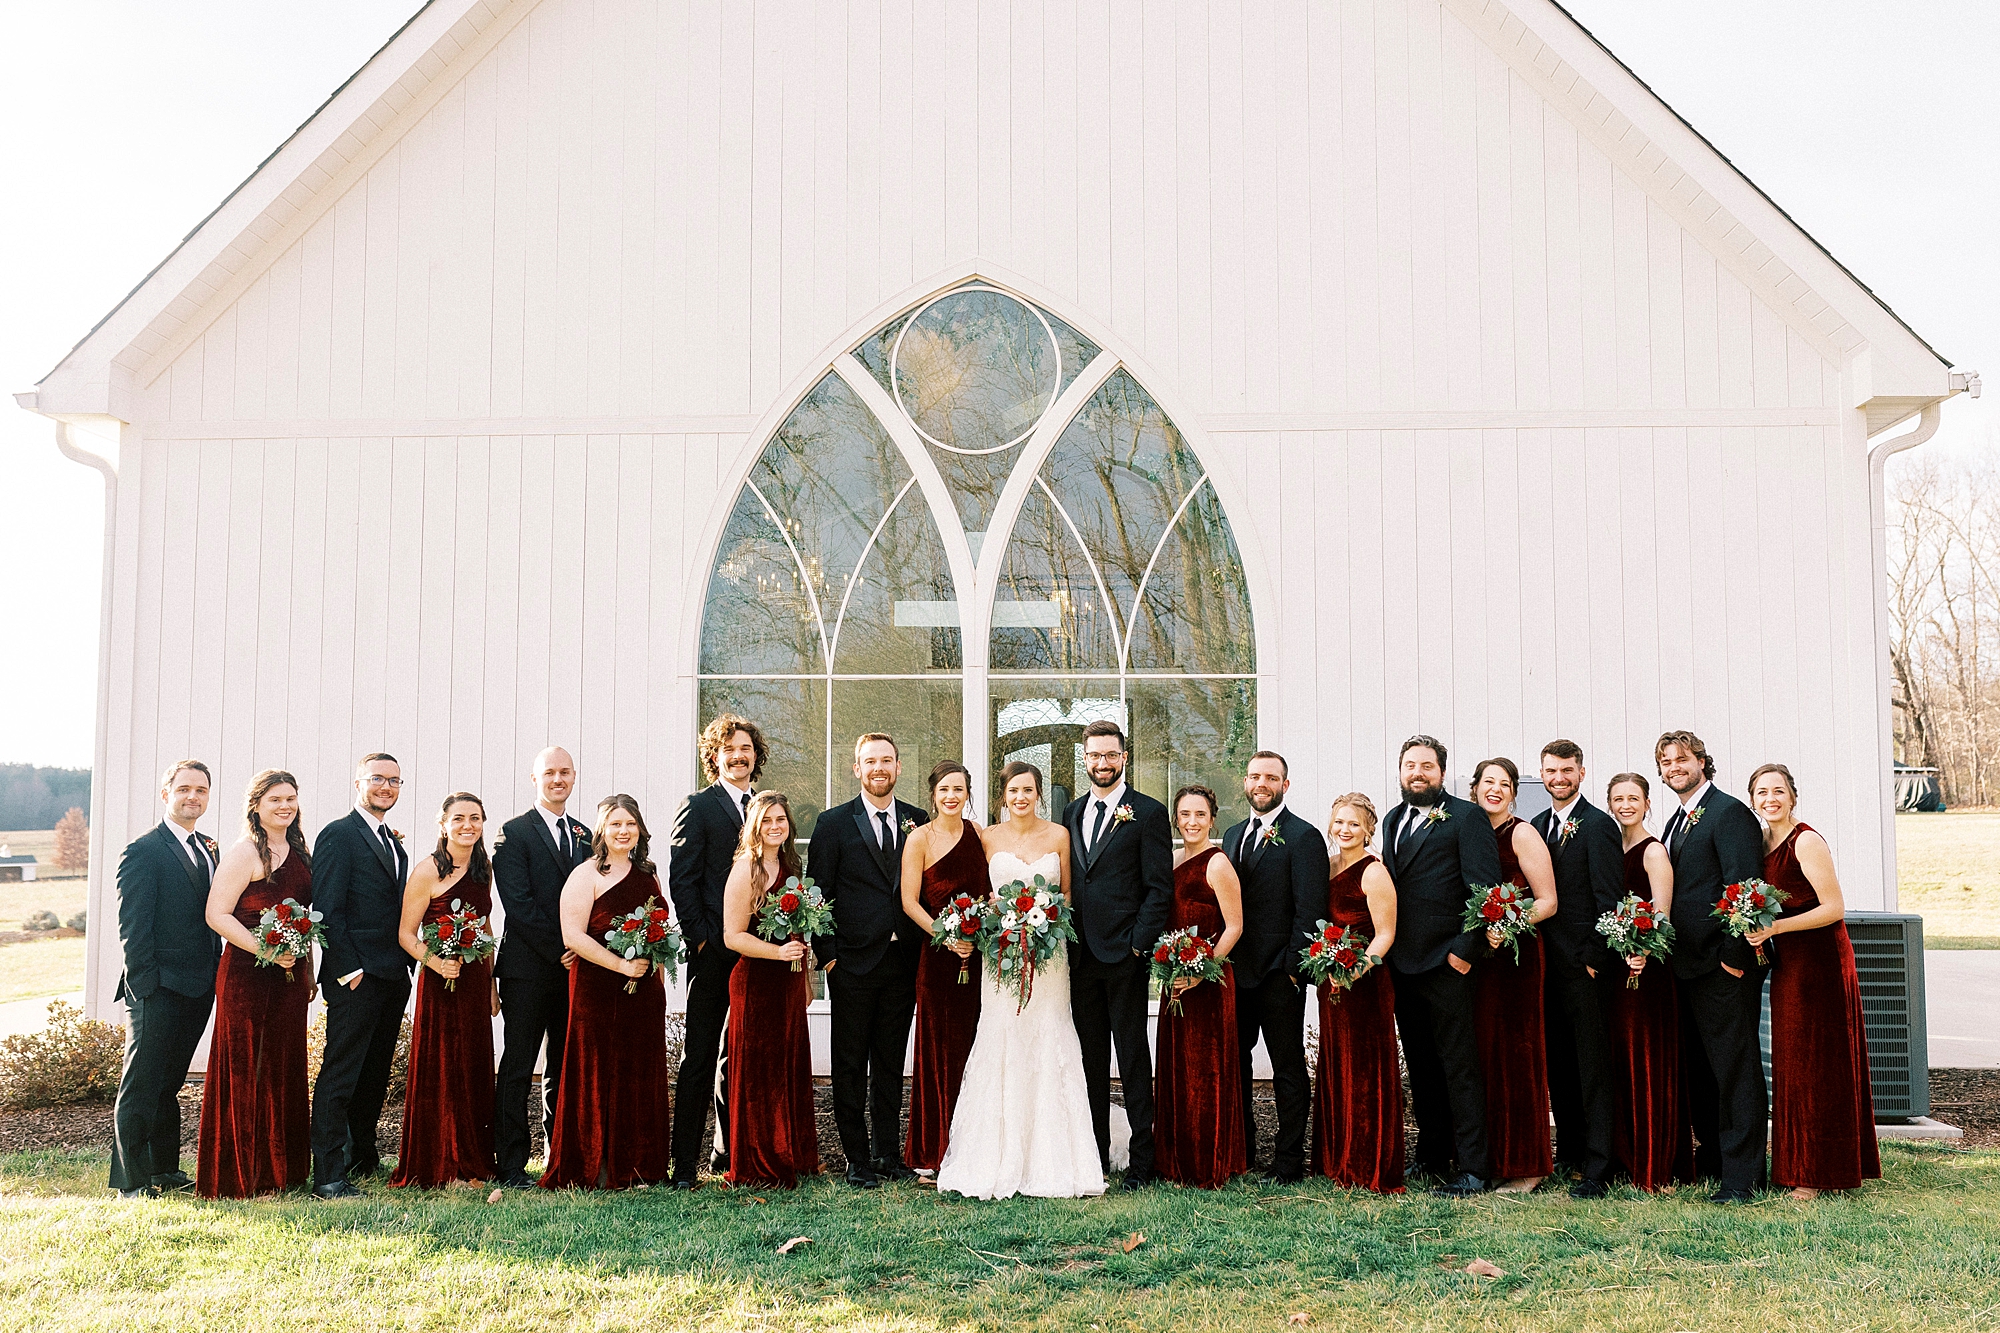 bride and groom stand with wedding party in burgundy gowns and black suits 